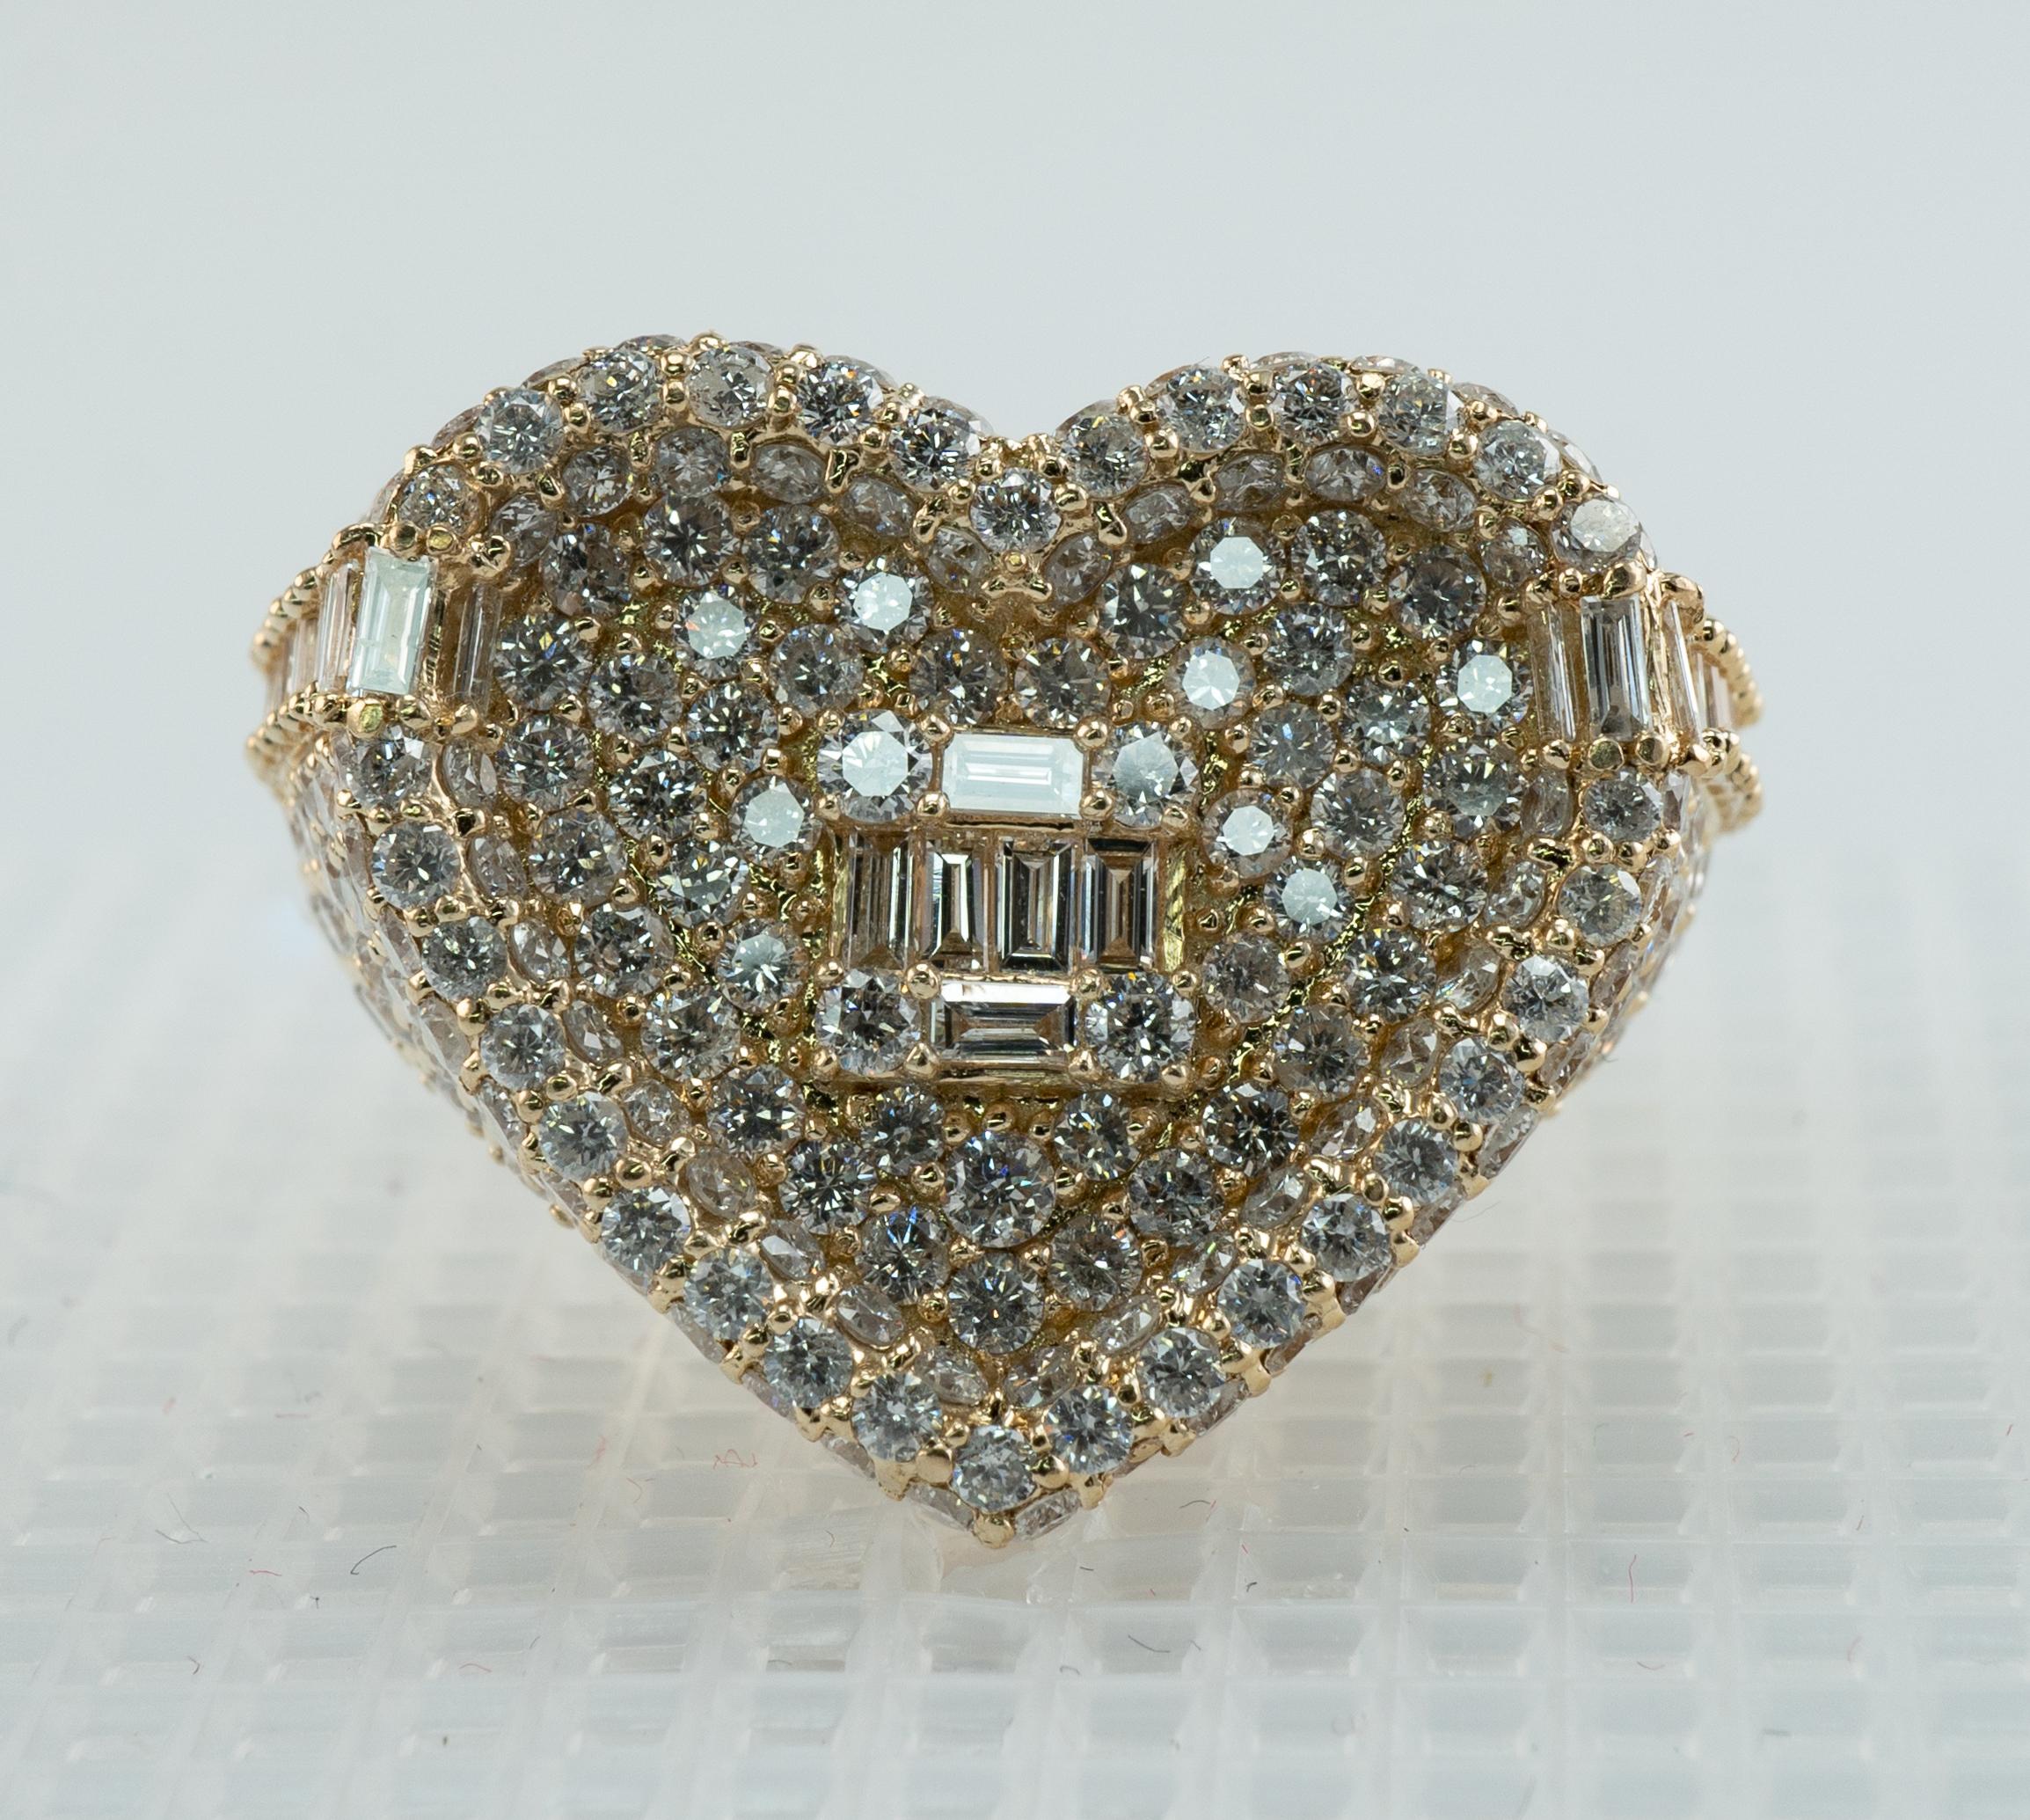 Heart Natural Diamond Ring 14K Gold 3.74 cts by Yashar Jewelry

This estate ring is made in the shape of Heart.
The ring is studded with about 295 round diamonds and 26 diamond baguettes.
The diamonds are SI1-SI2 clarity and H color.
The total